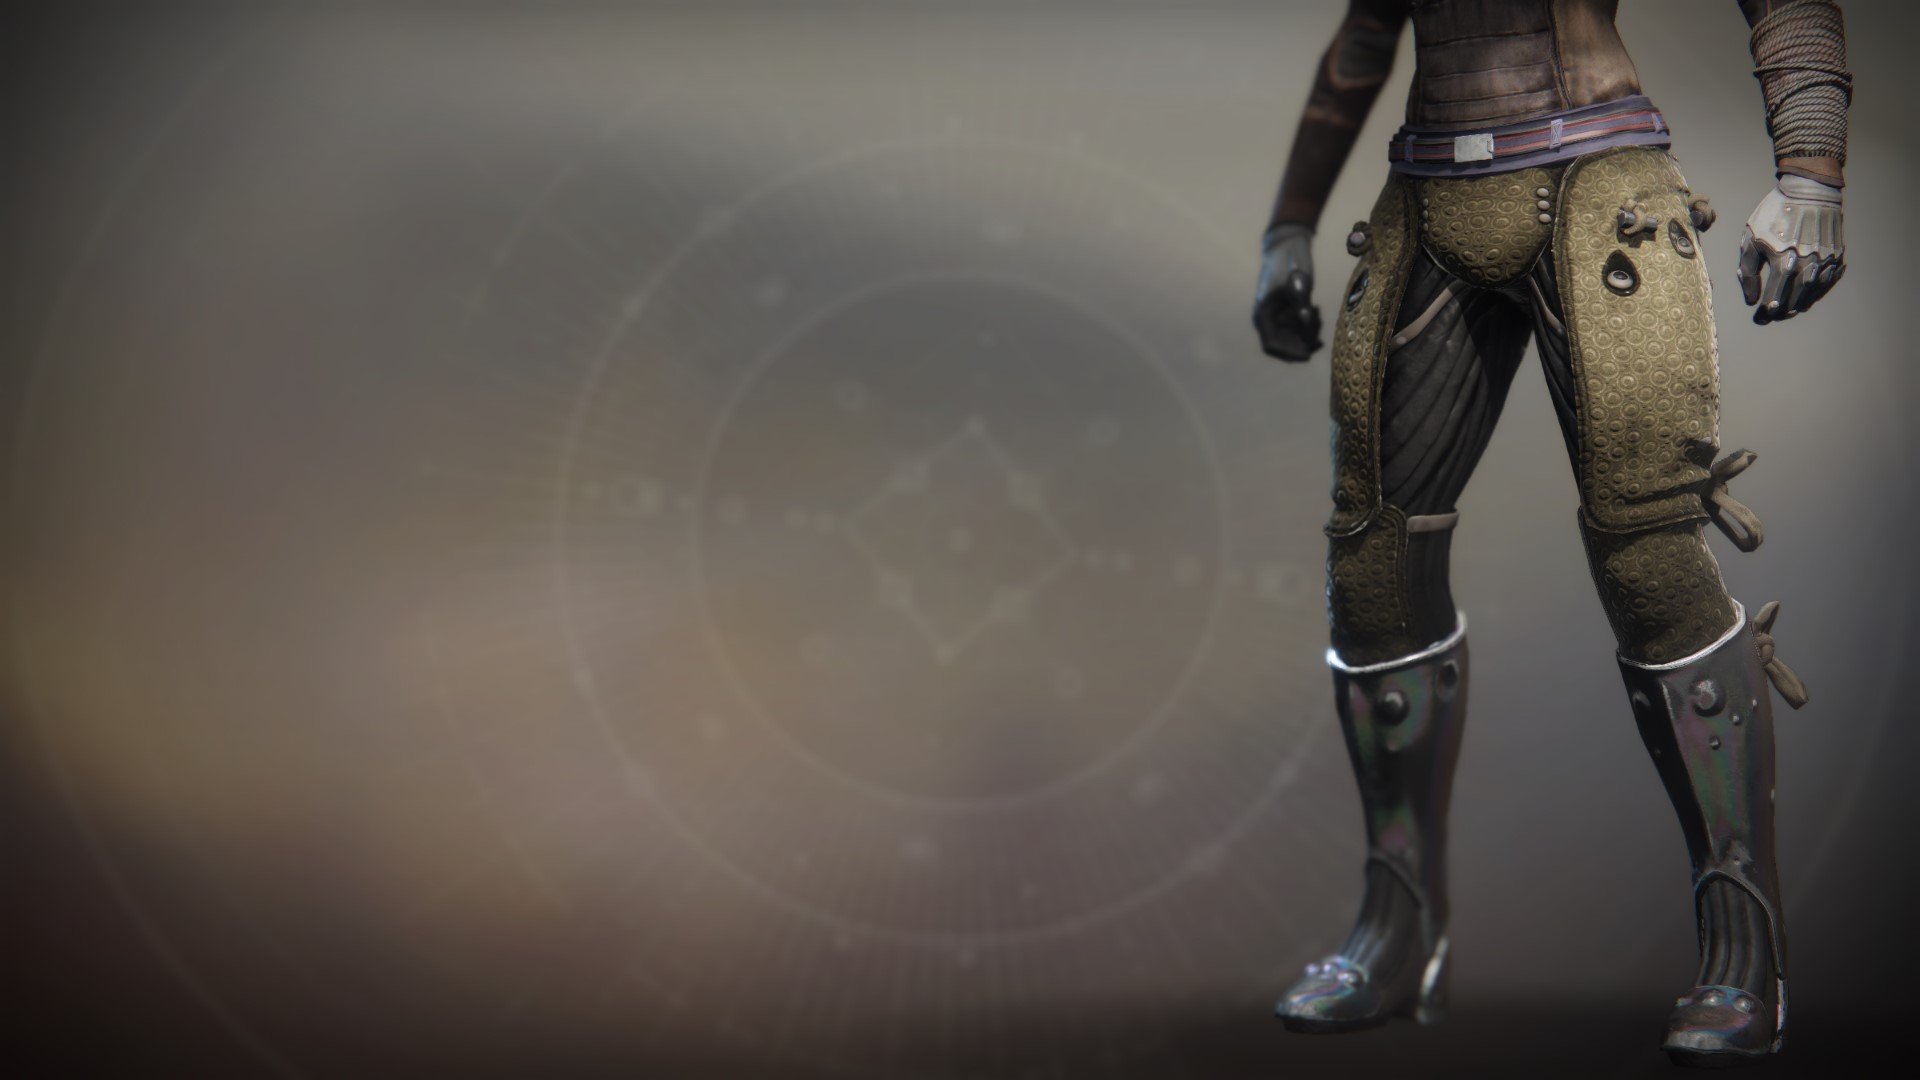 An in-game render of the Boots of Feltroc.